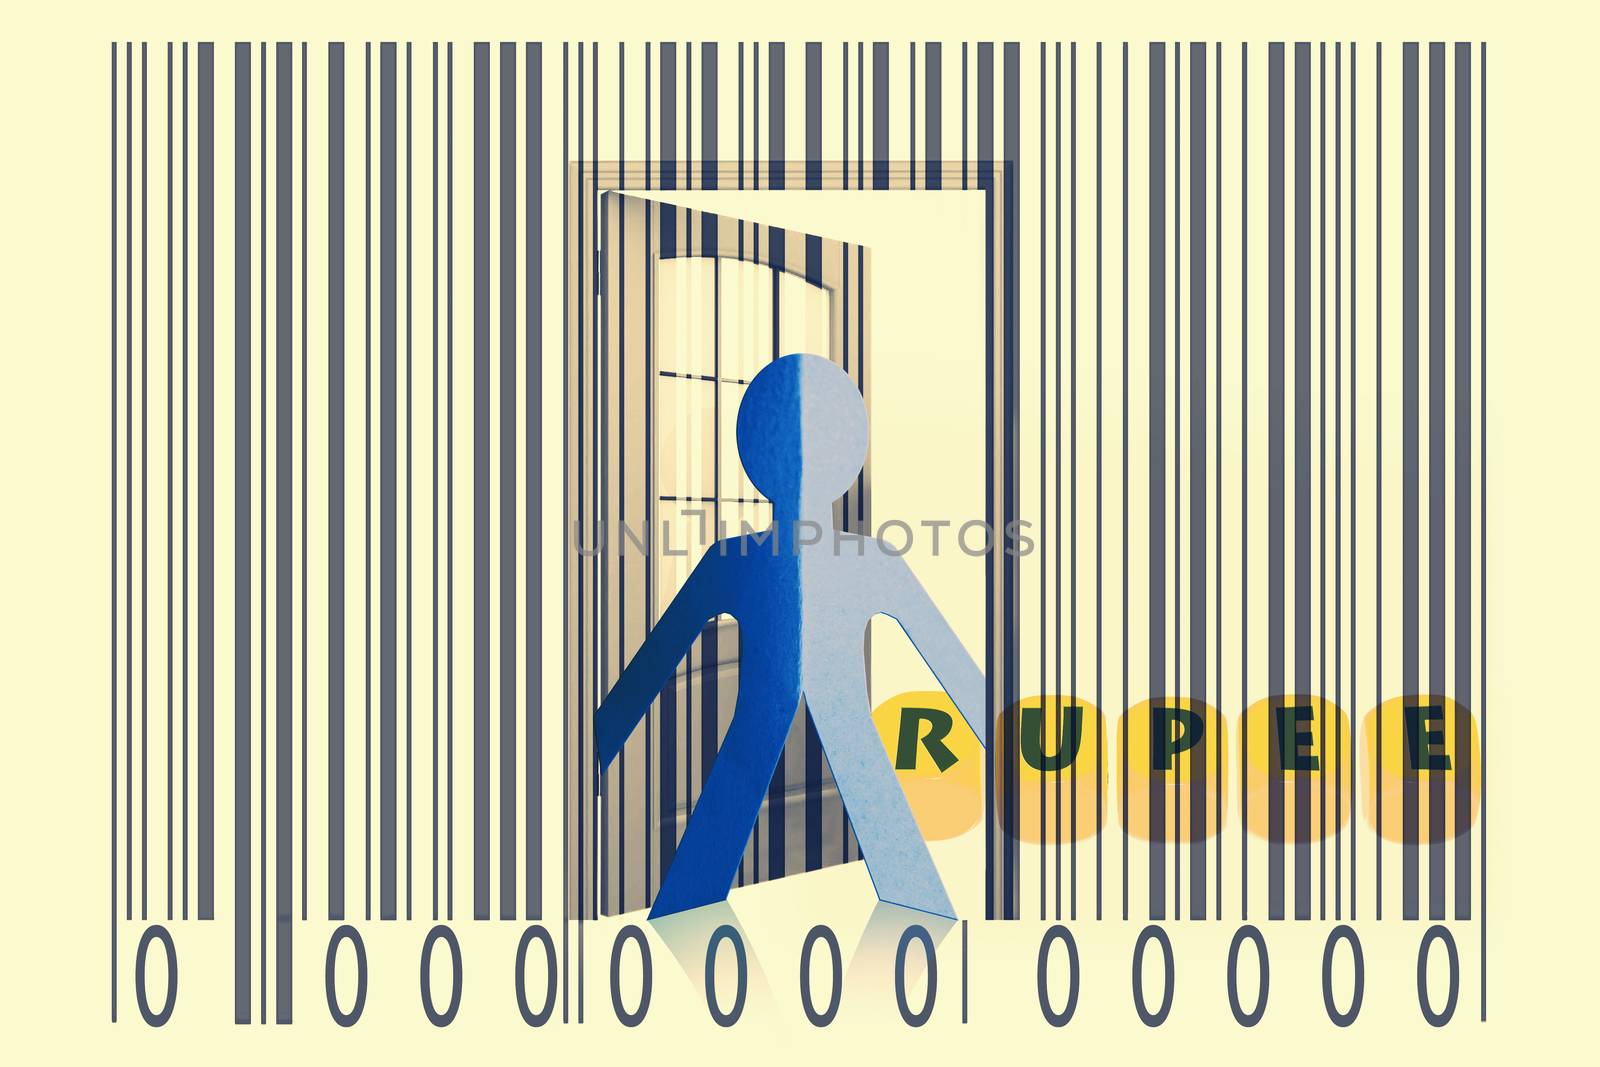 Paperman coming out of a bar code with Rupee word by yands